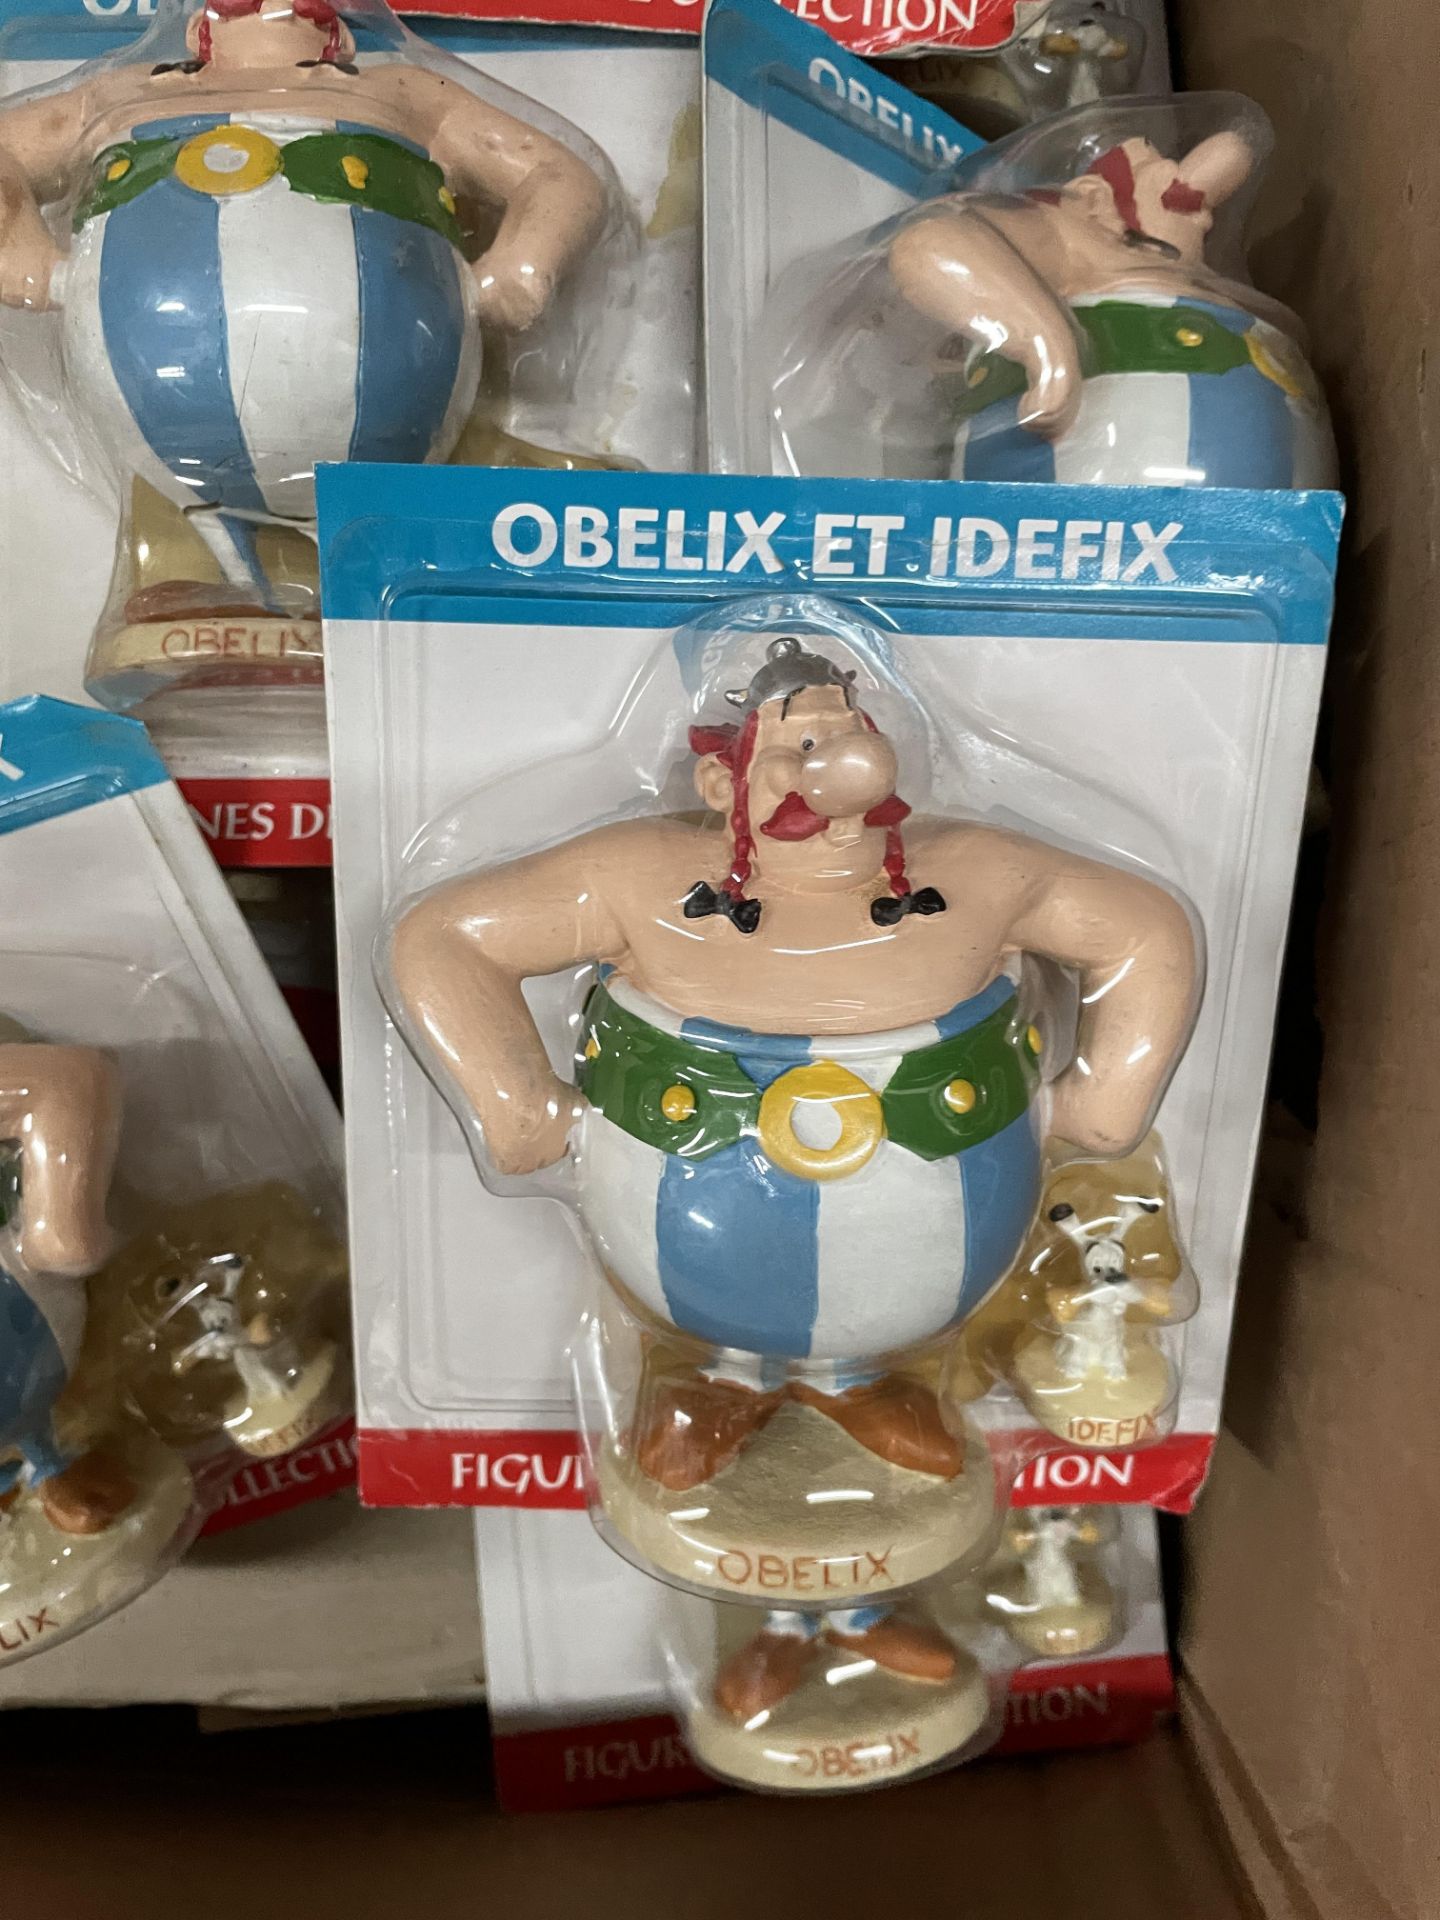 15 Vintage Theme French Canada Toys New in box, Obelix et Idefix - Image 2 of 4